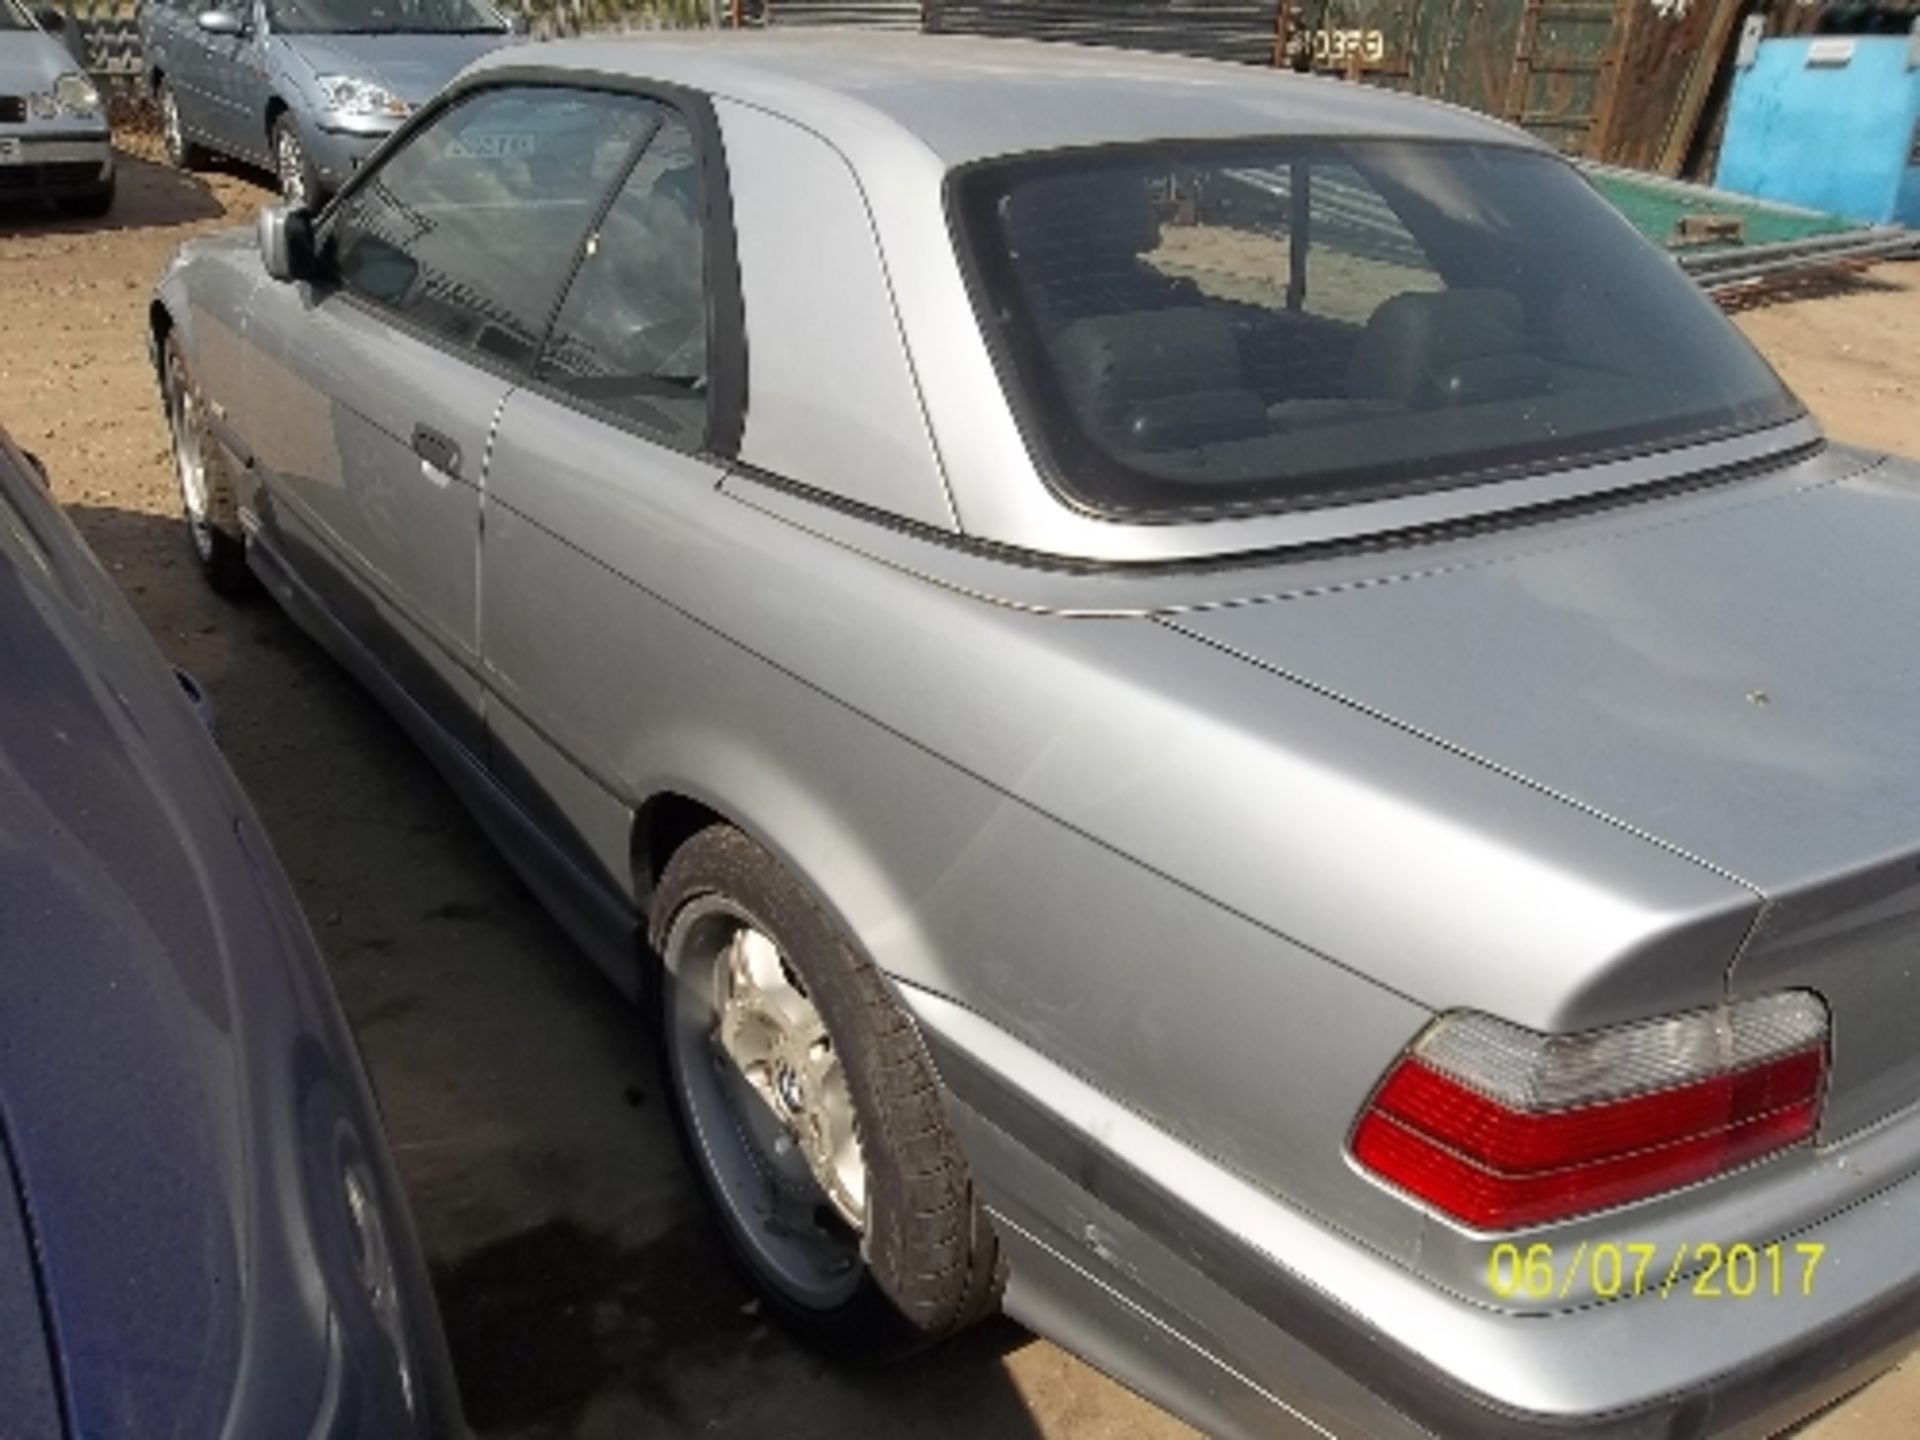 BMW 318 I Convertible - R979 ENS Date of registration: 26.08.1997 1796cc, petrol, manual, silver - Image 4 of 4